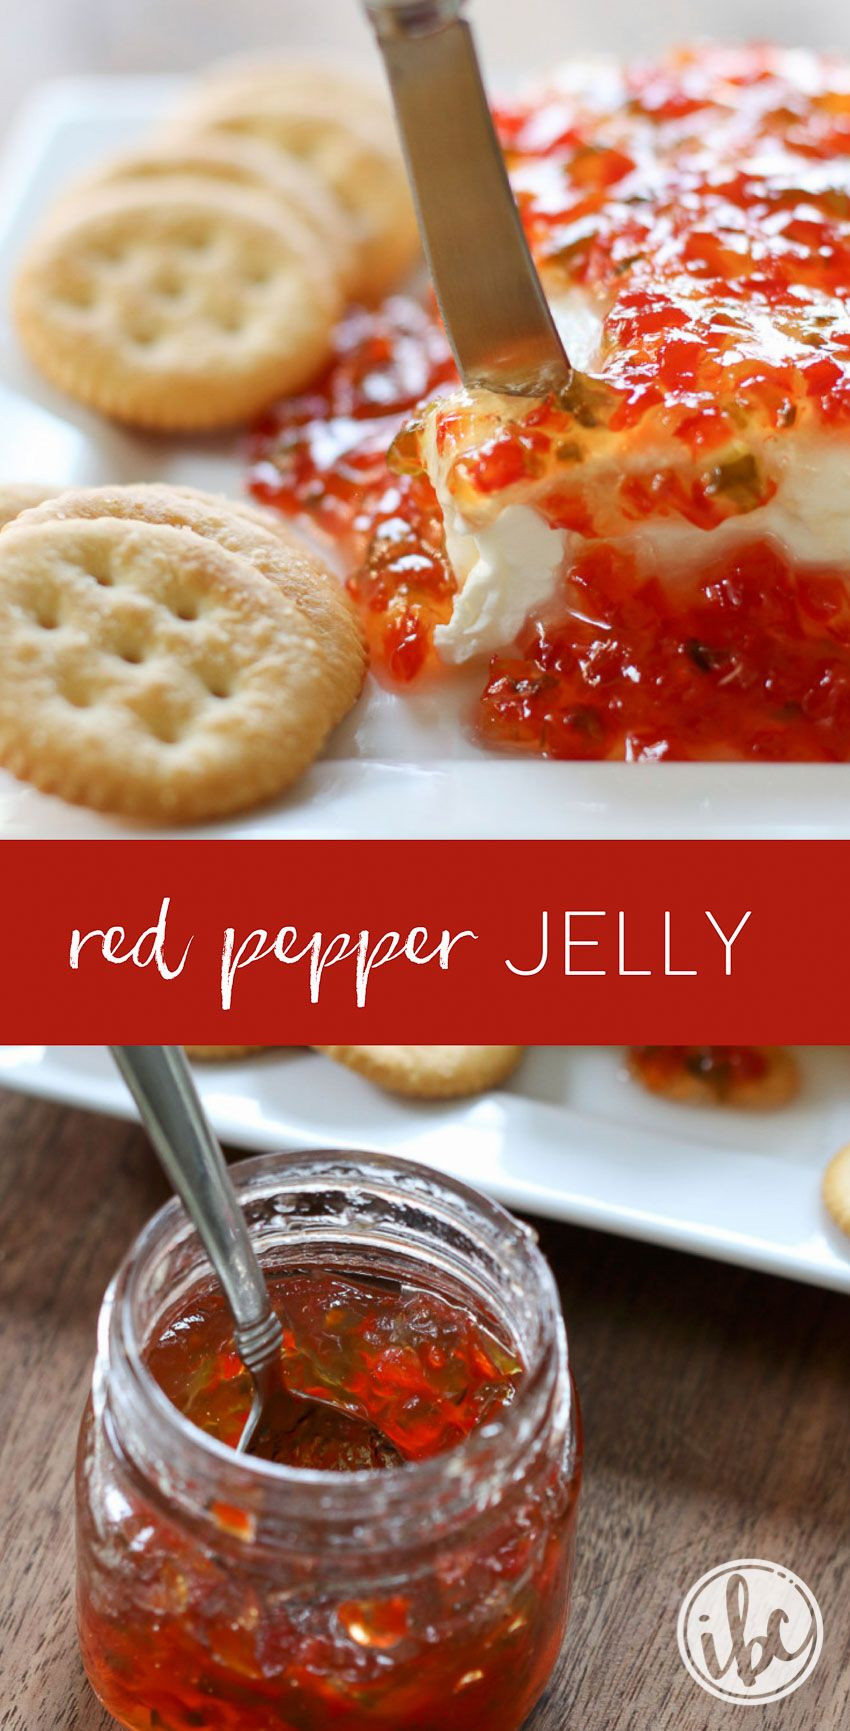 Cream Cheese Appetizers Jelly
 This homemade Red Pepper Jelly makes a delicious holiday